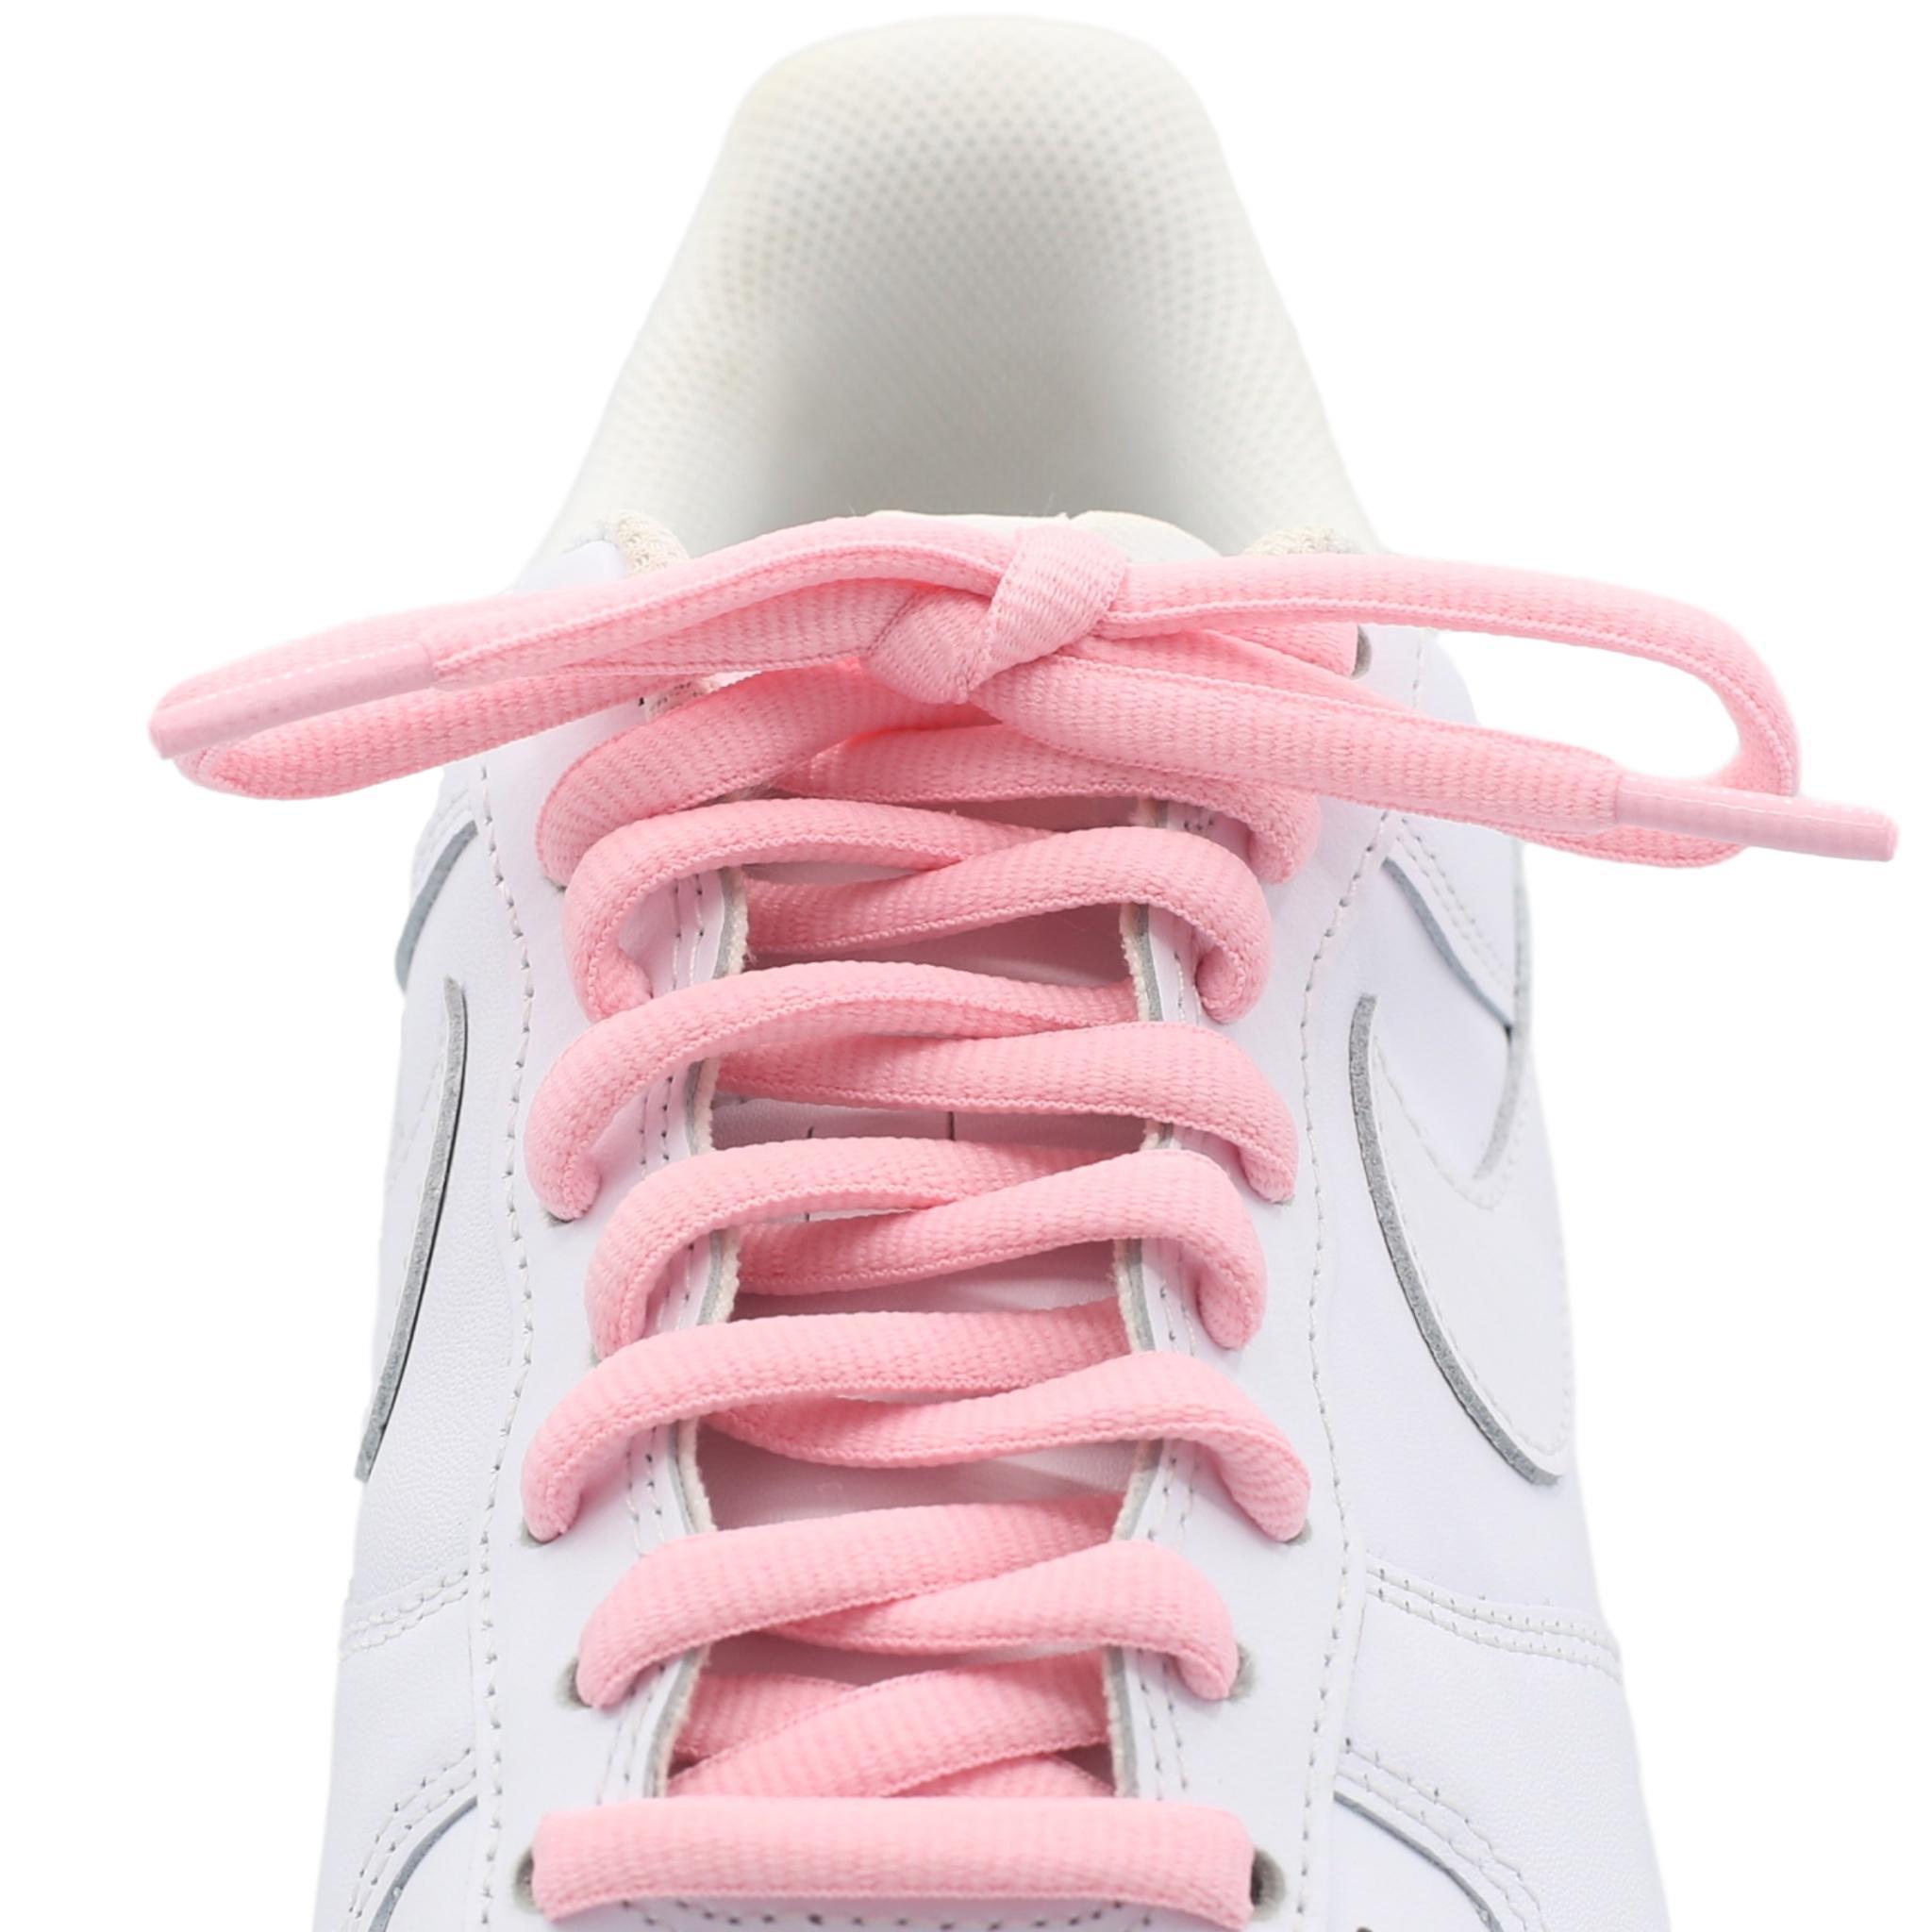  Thick Laces For Sneakers